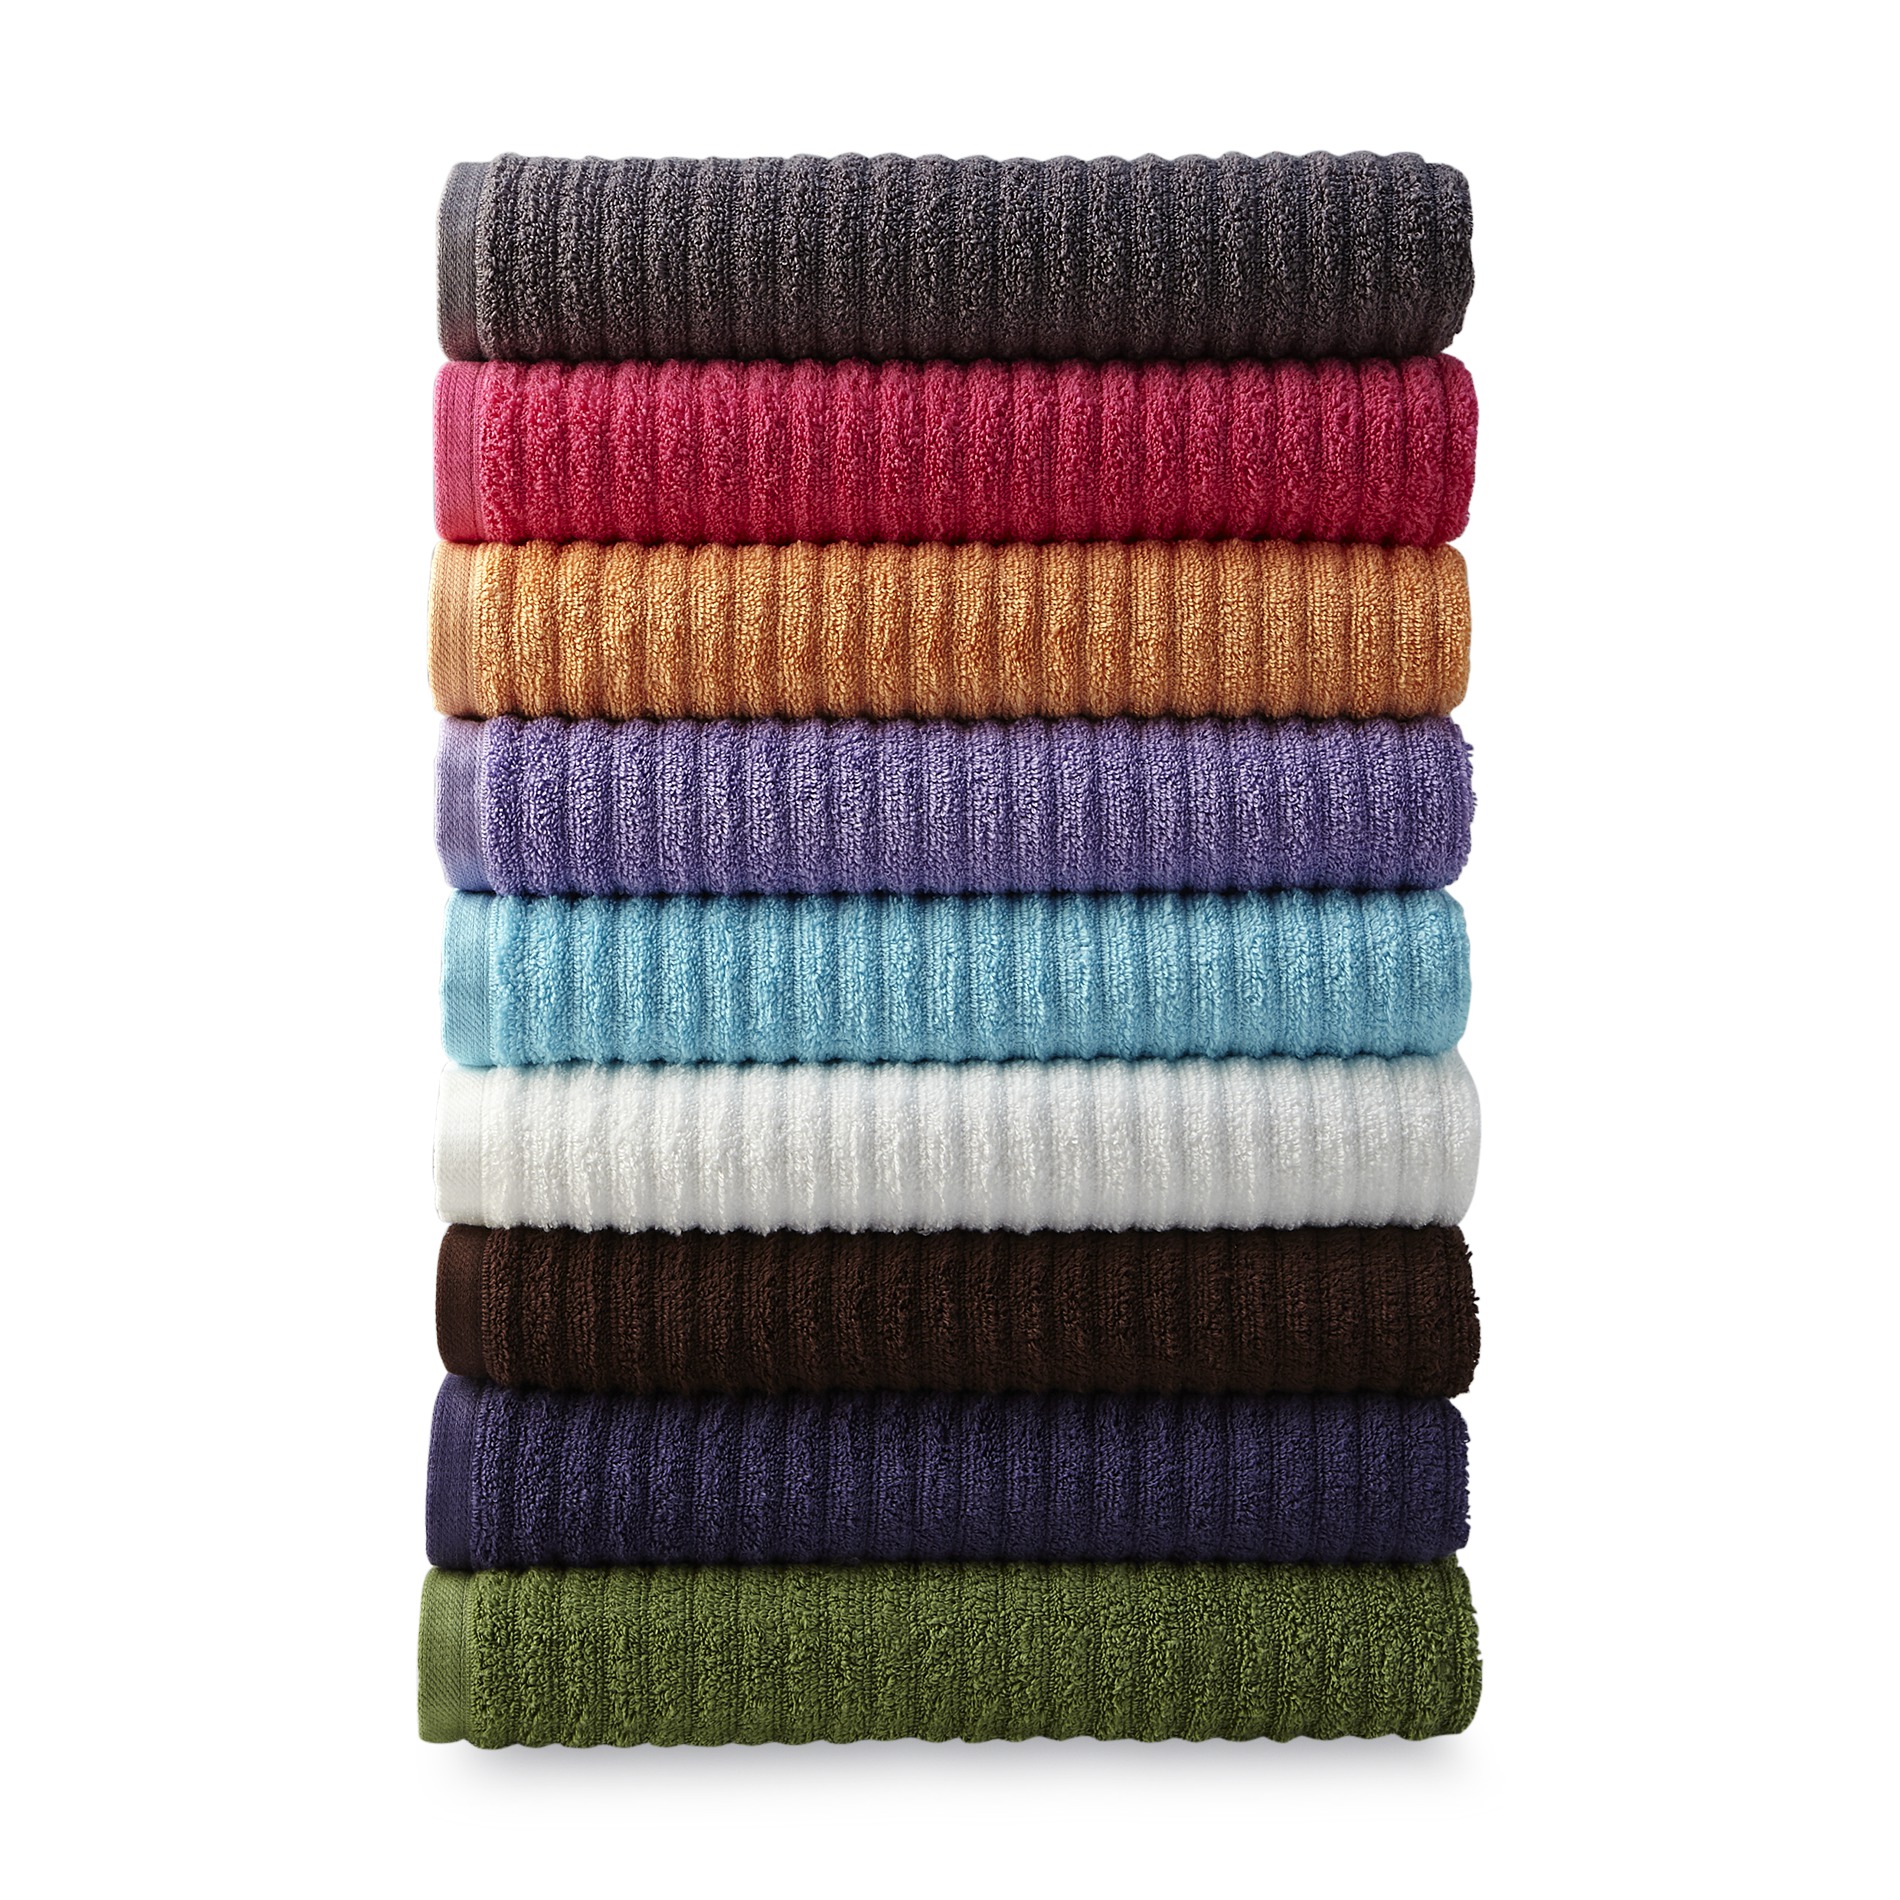 Colormate Quick Dry Cotton Bath Towels Hand Towels or Washcloths